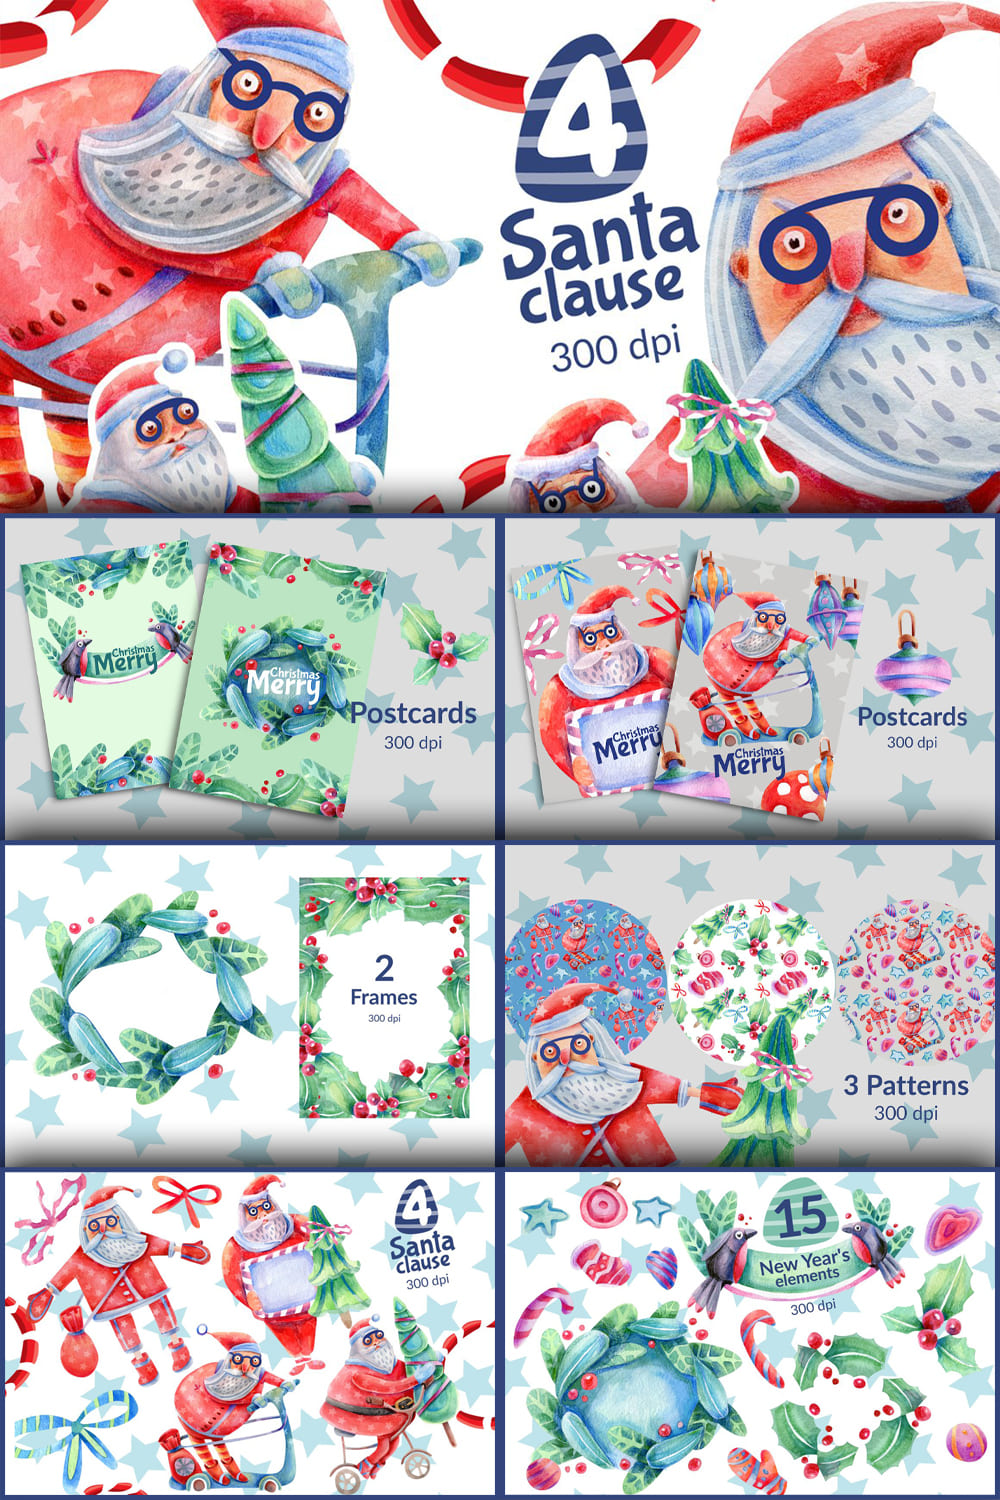 Santa claus watercolor and christmas Images of pinterest.